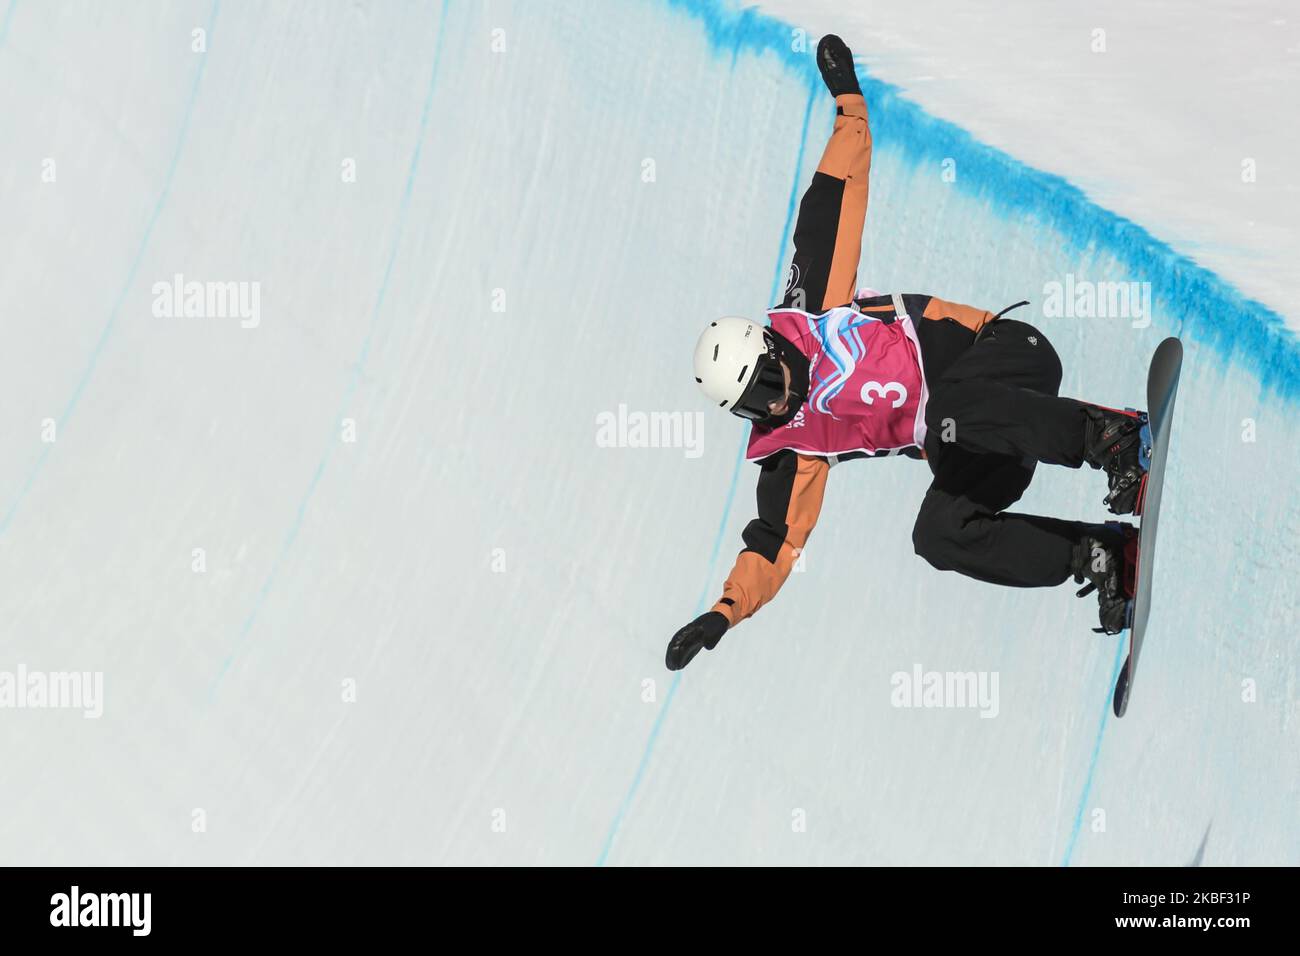 GILL Liam from Canada competes in Men's Halfpipe Qualification on 12. day of Winter Youth Olympic Games Lausanne 2020 in Leysin Park & Pipe, Switzerland on January 21, 2020. (Photo by Dominika Zarzycka/NurPhoto) Stock Photo